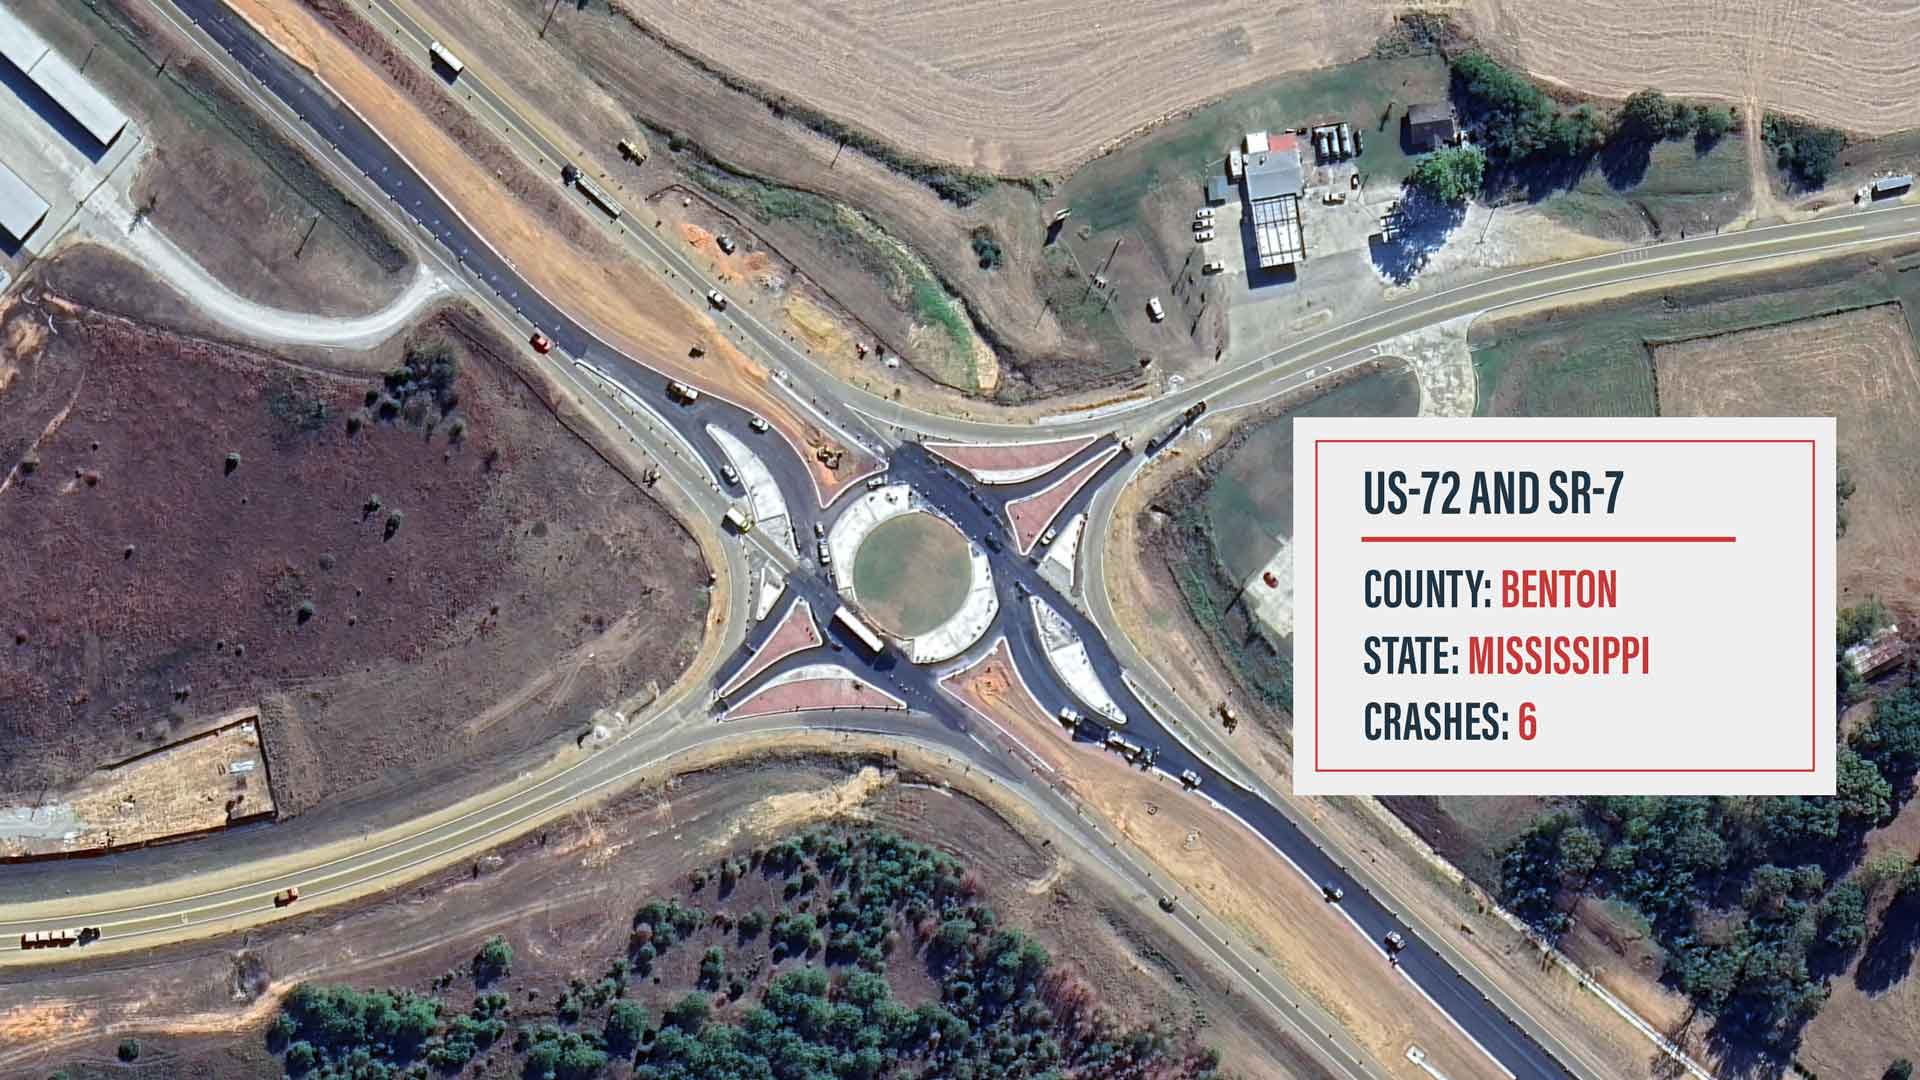 Aerial view of US-72 AND SR-7 